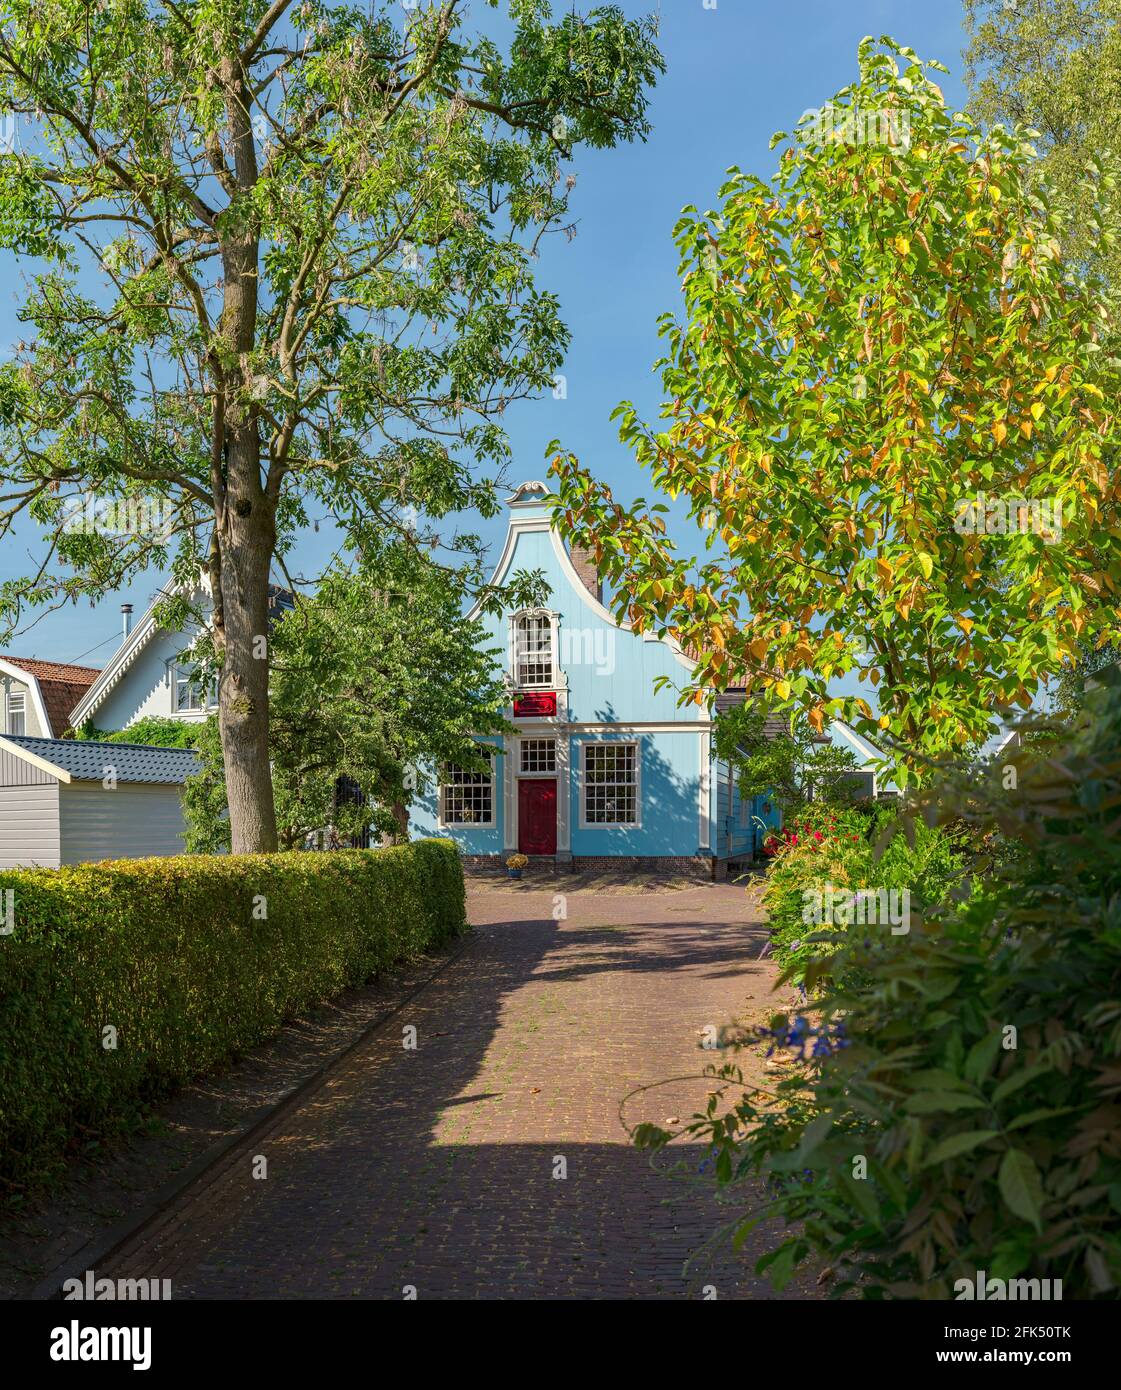 Wooden houses *** Local Caption ***  Broek in Waterland,   Noord-Holland, Netherlands, city, village, forest, wood, trees, summer, Stock Photo